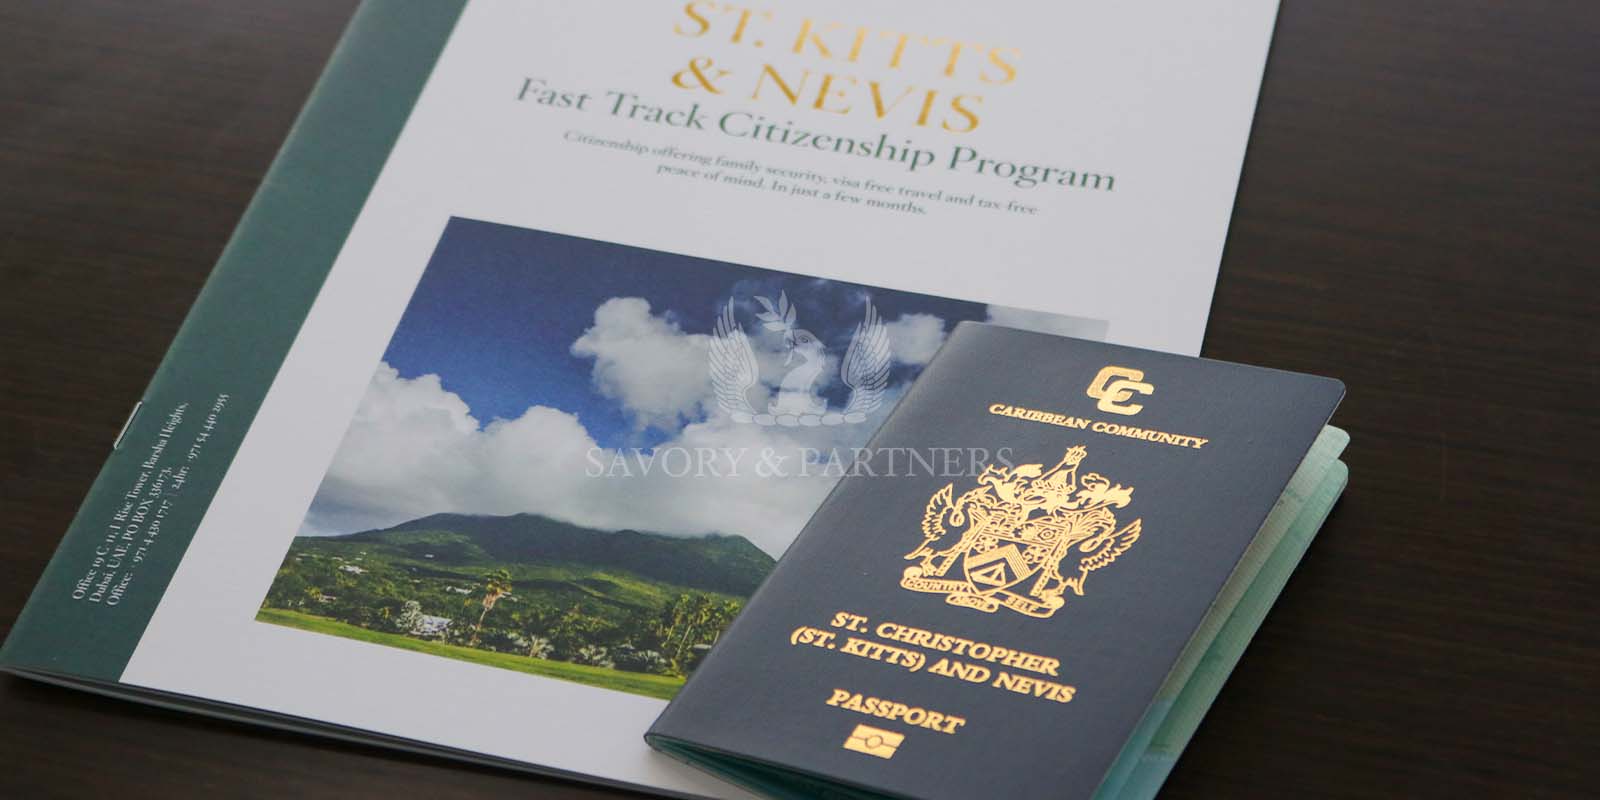 St Kitts & Nevis introduced a new form of investment under its CBI program.